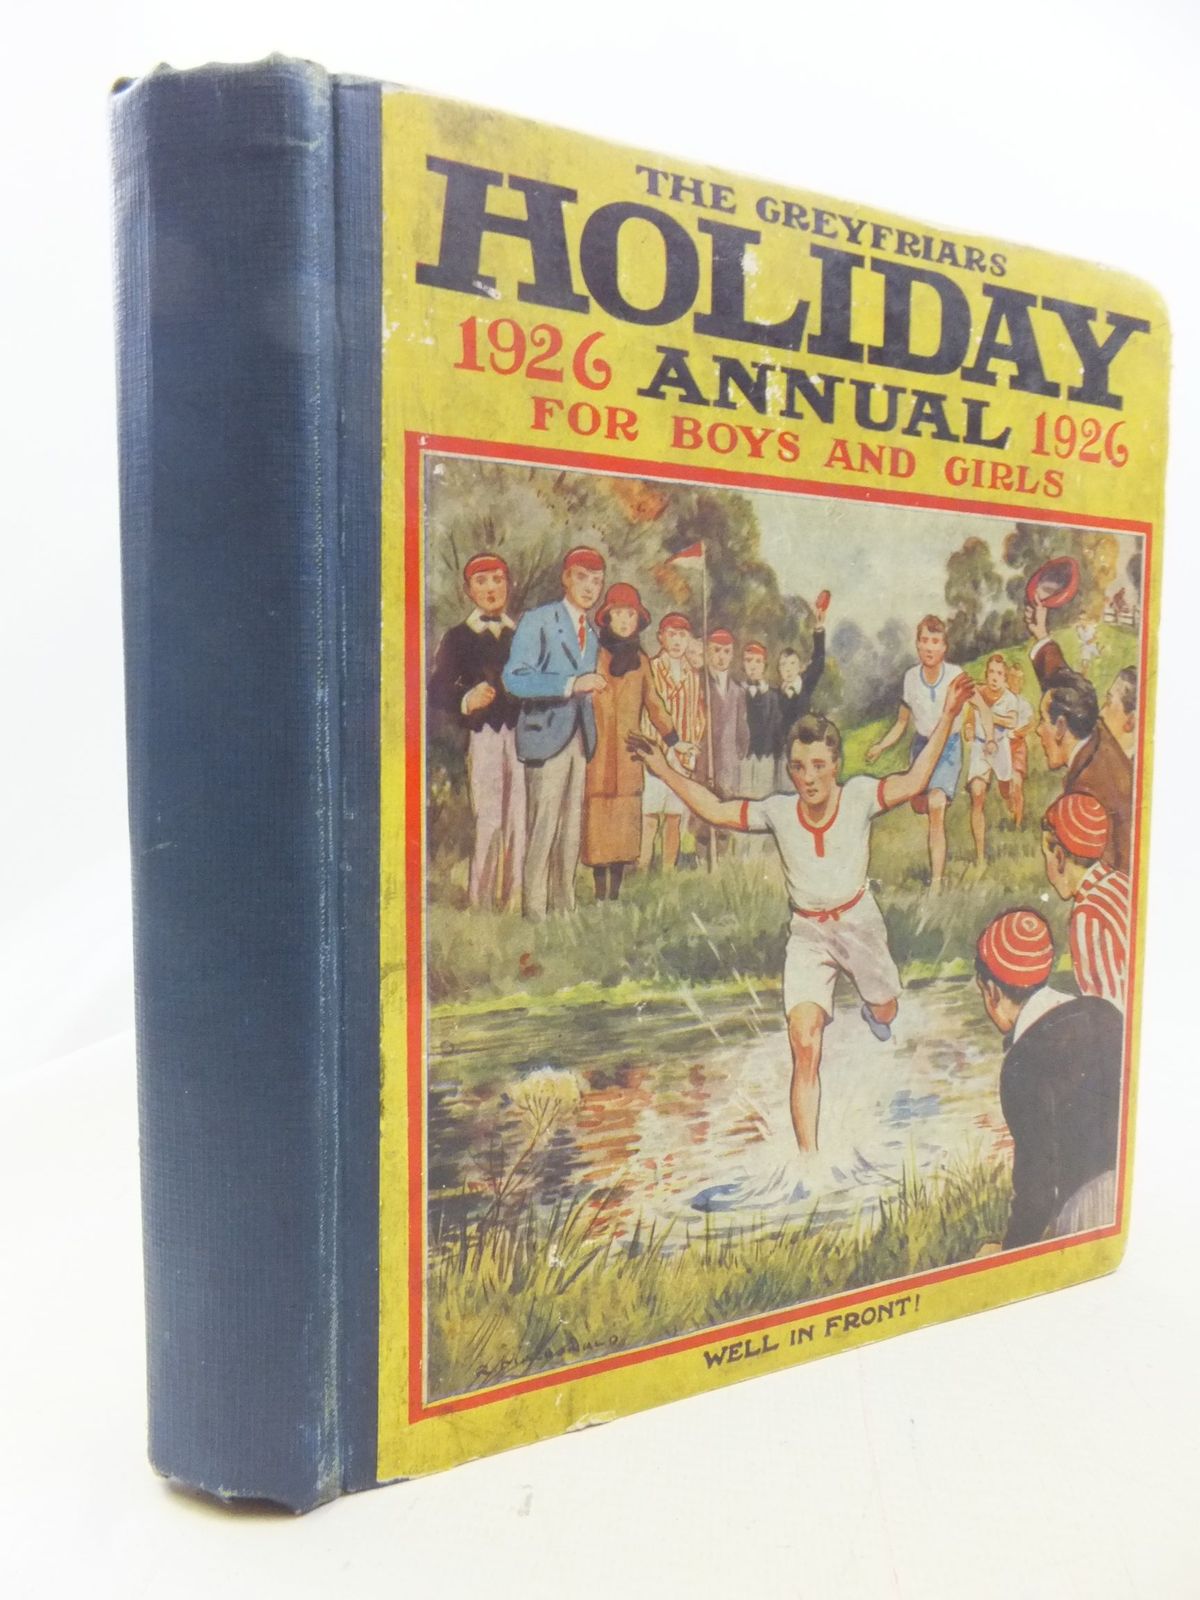 Photo of THE GREYFRIARS HOLIDAY ANNUAL 1926 written by Richards, Frank published by The Fleetway House (STOCK CODE: 1711348)  for sale by Stella & Rose's Books